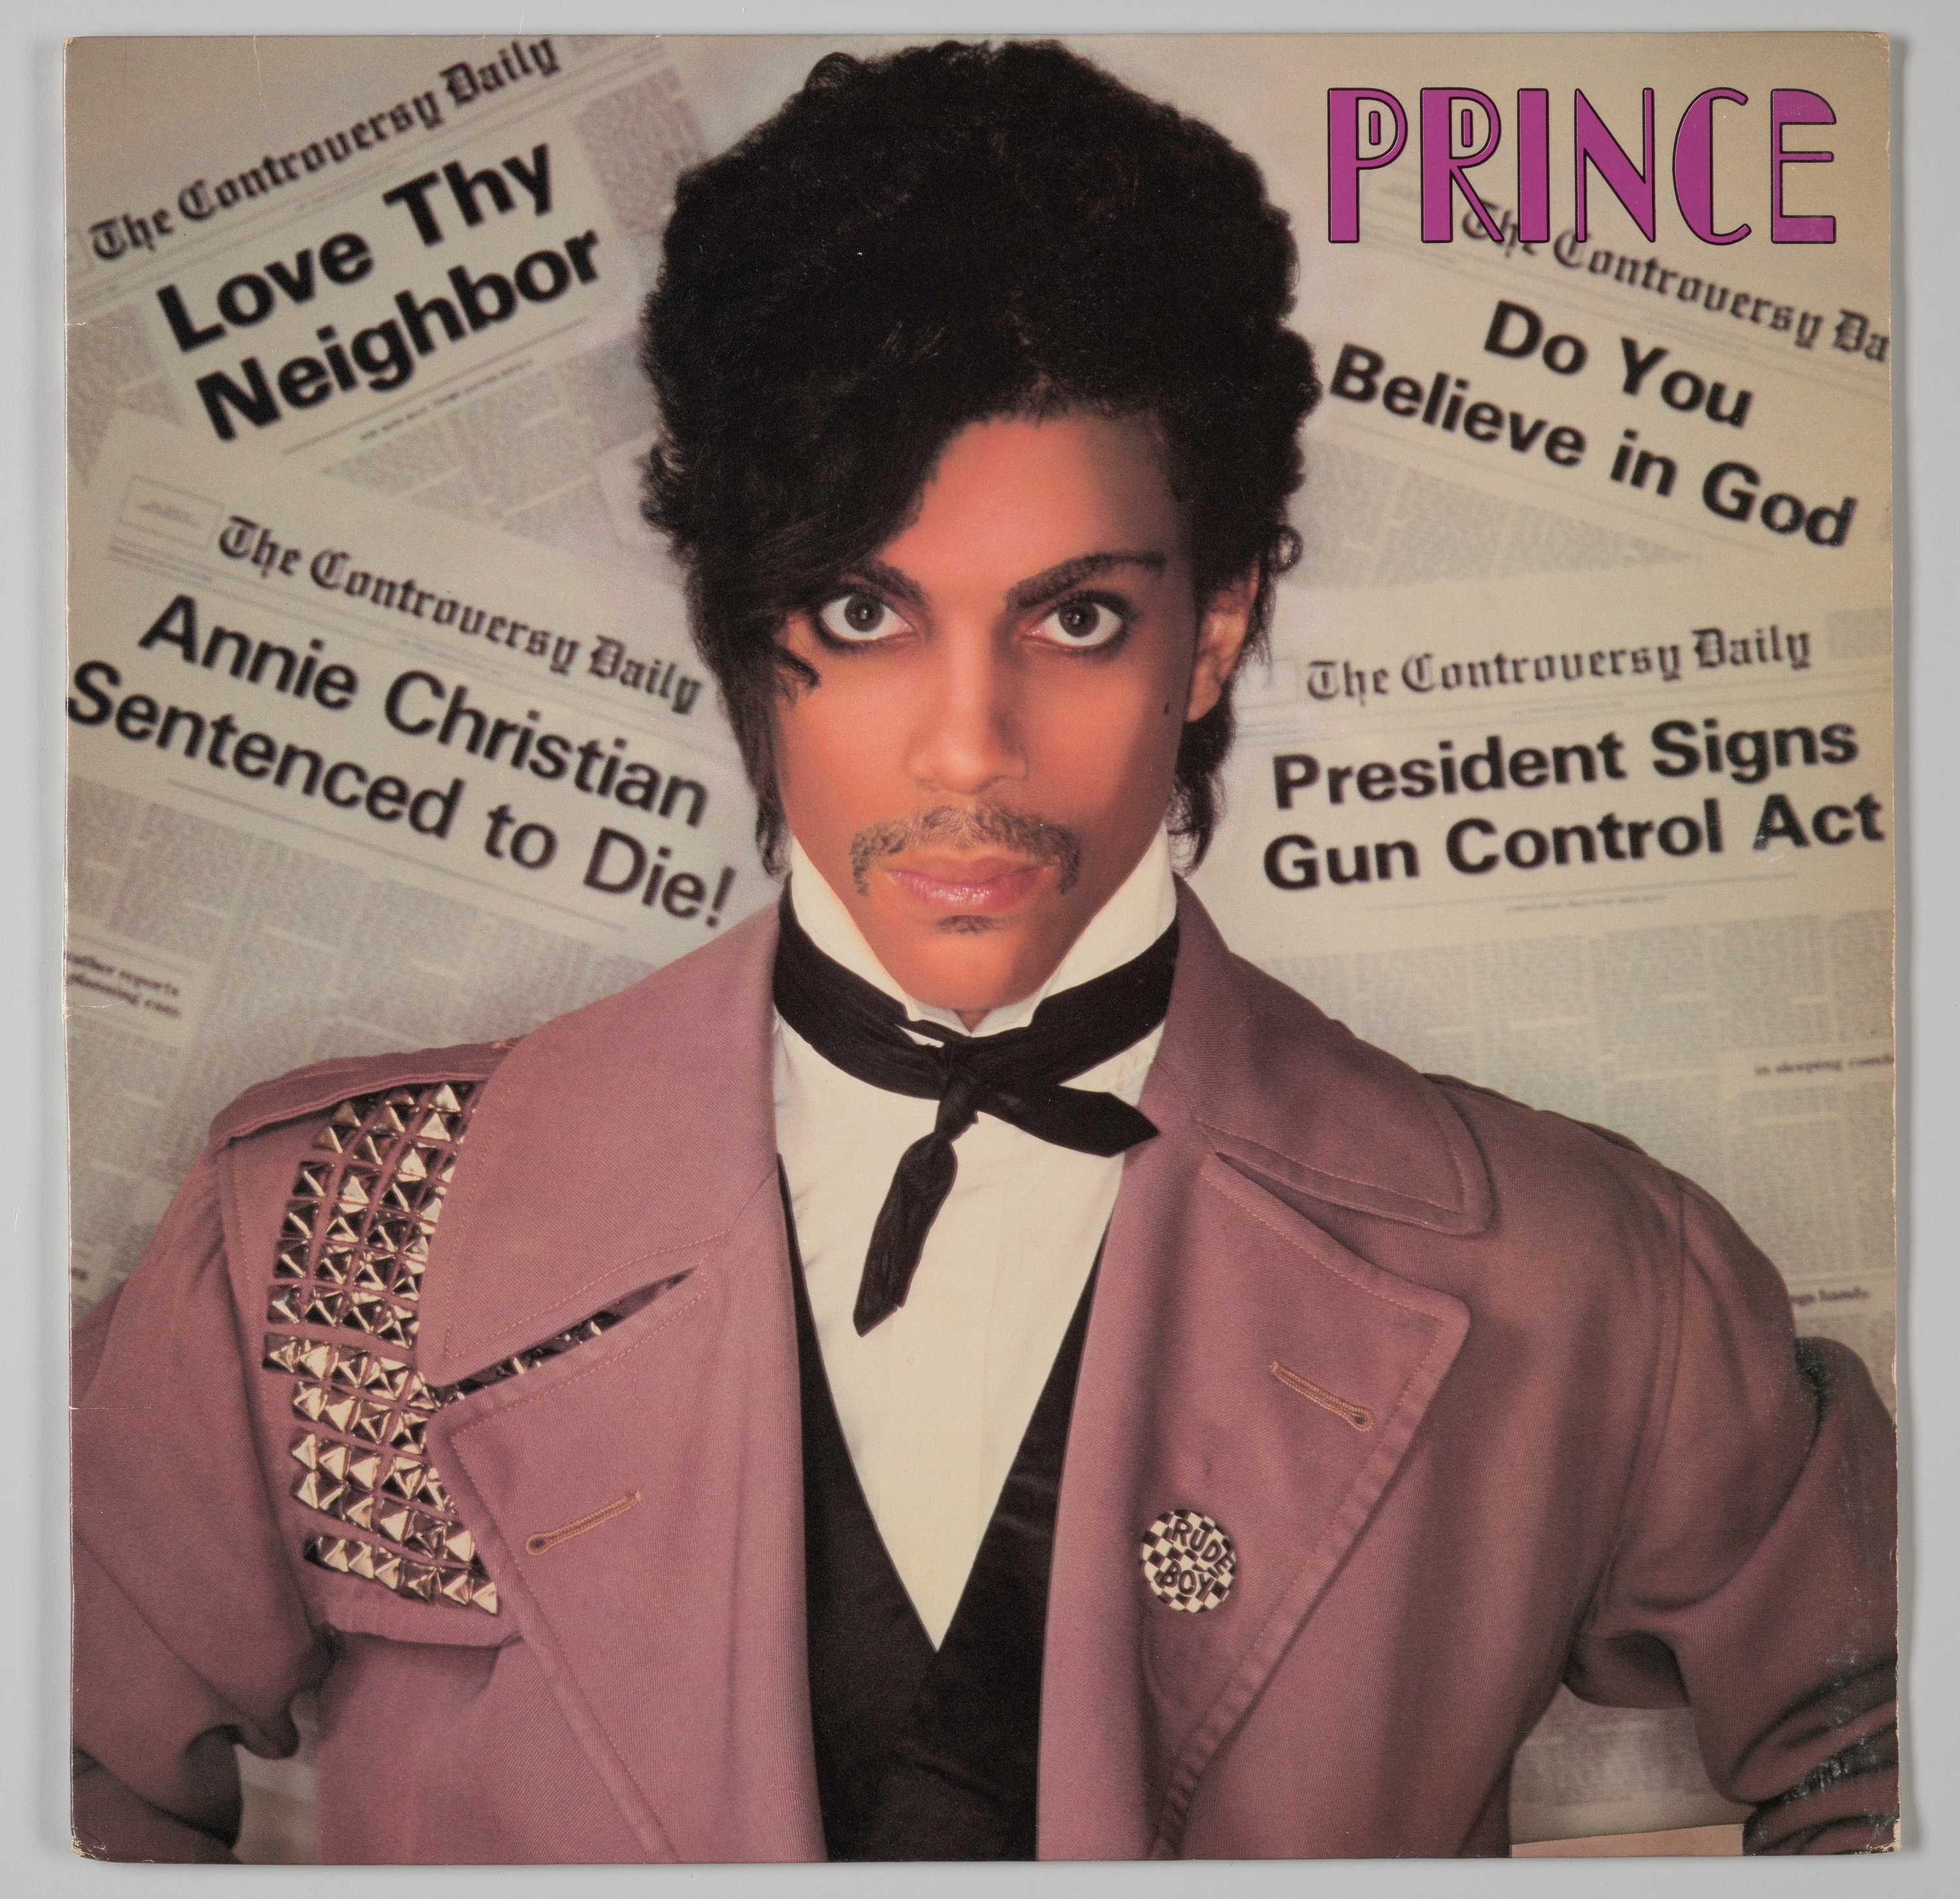 Image of the album jacket for Prince's album "Controversy" featuring a photograph of Prince.